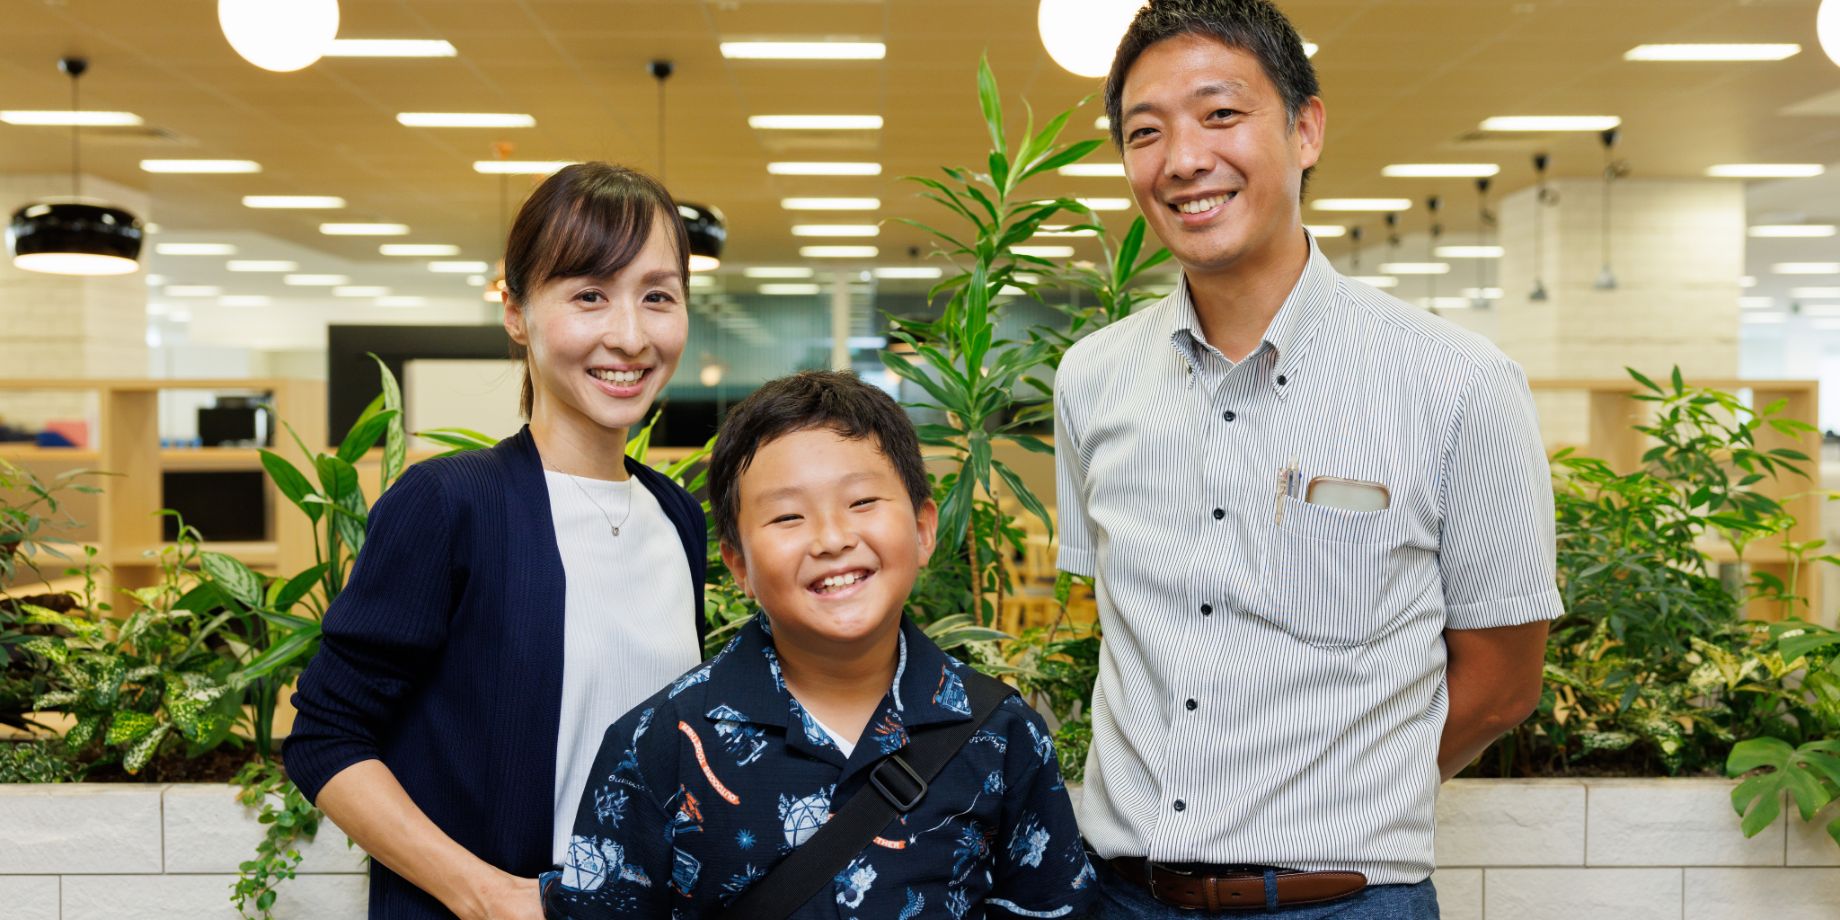 Sho Aoto (on loan to FLCS Co., Ltd. under IT Equipment Business Division II), his wife Kyoko, and their son Haruma